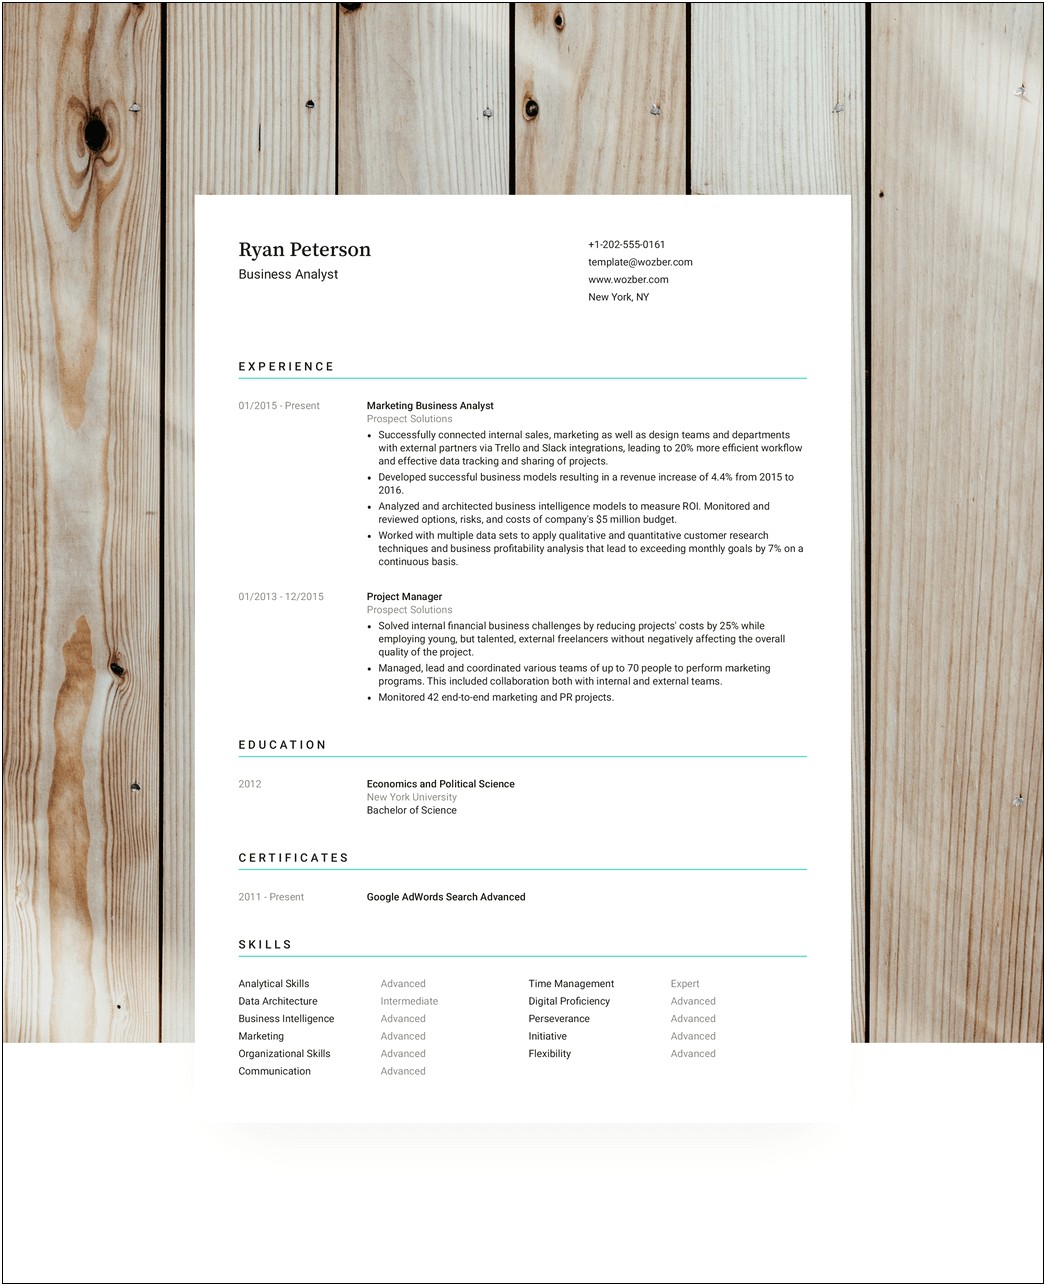 Resume Sample Professional Profile About Yourself